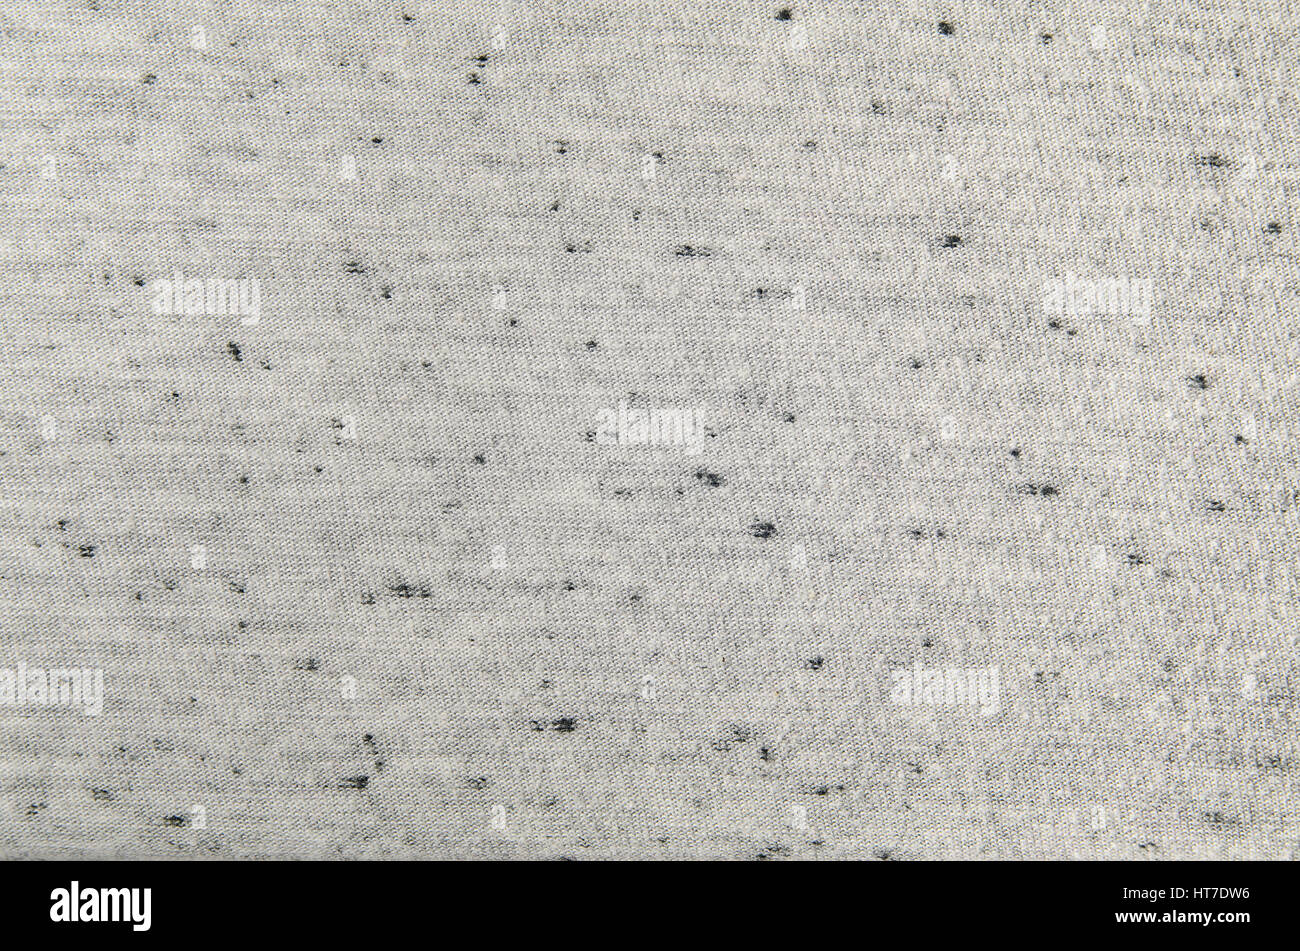 Gray fabric texture with black specks. Cloth background Stock Photo